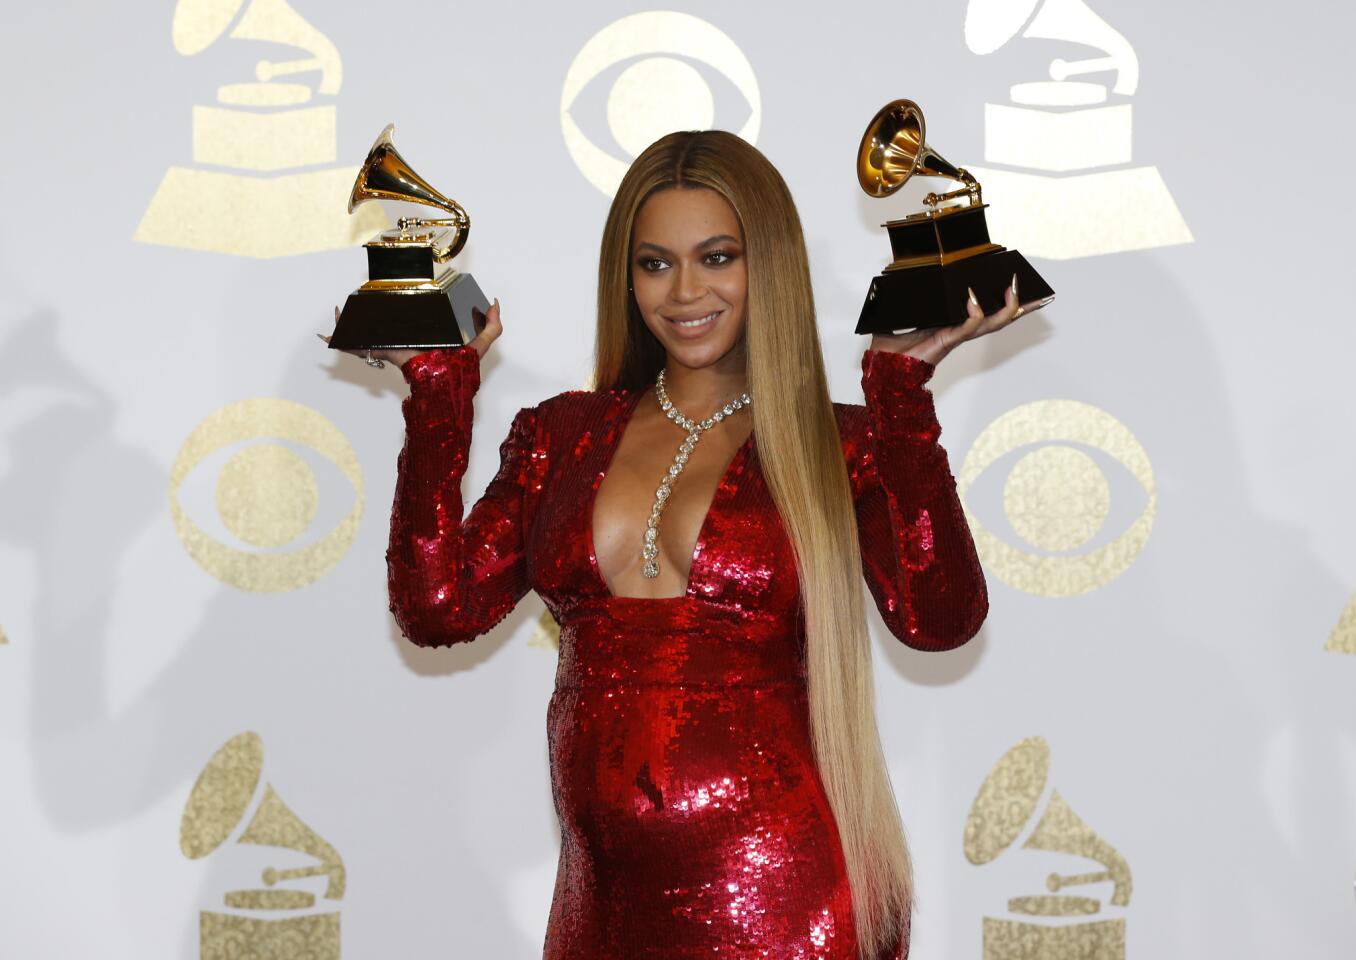 Beyonce backstage at the 59th Grammy Awards at Staples Center in Los Angeles.